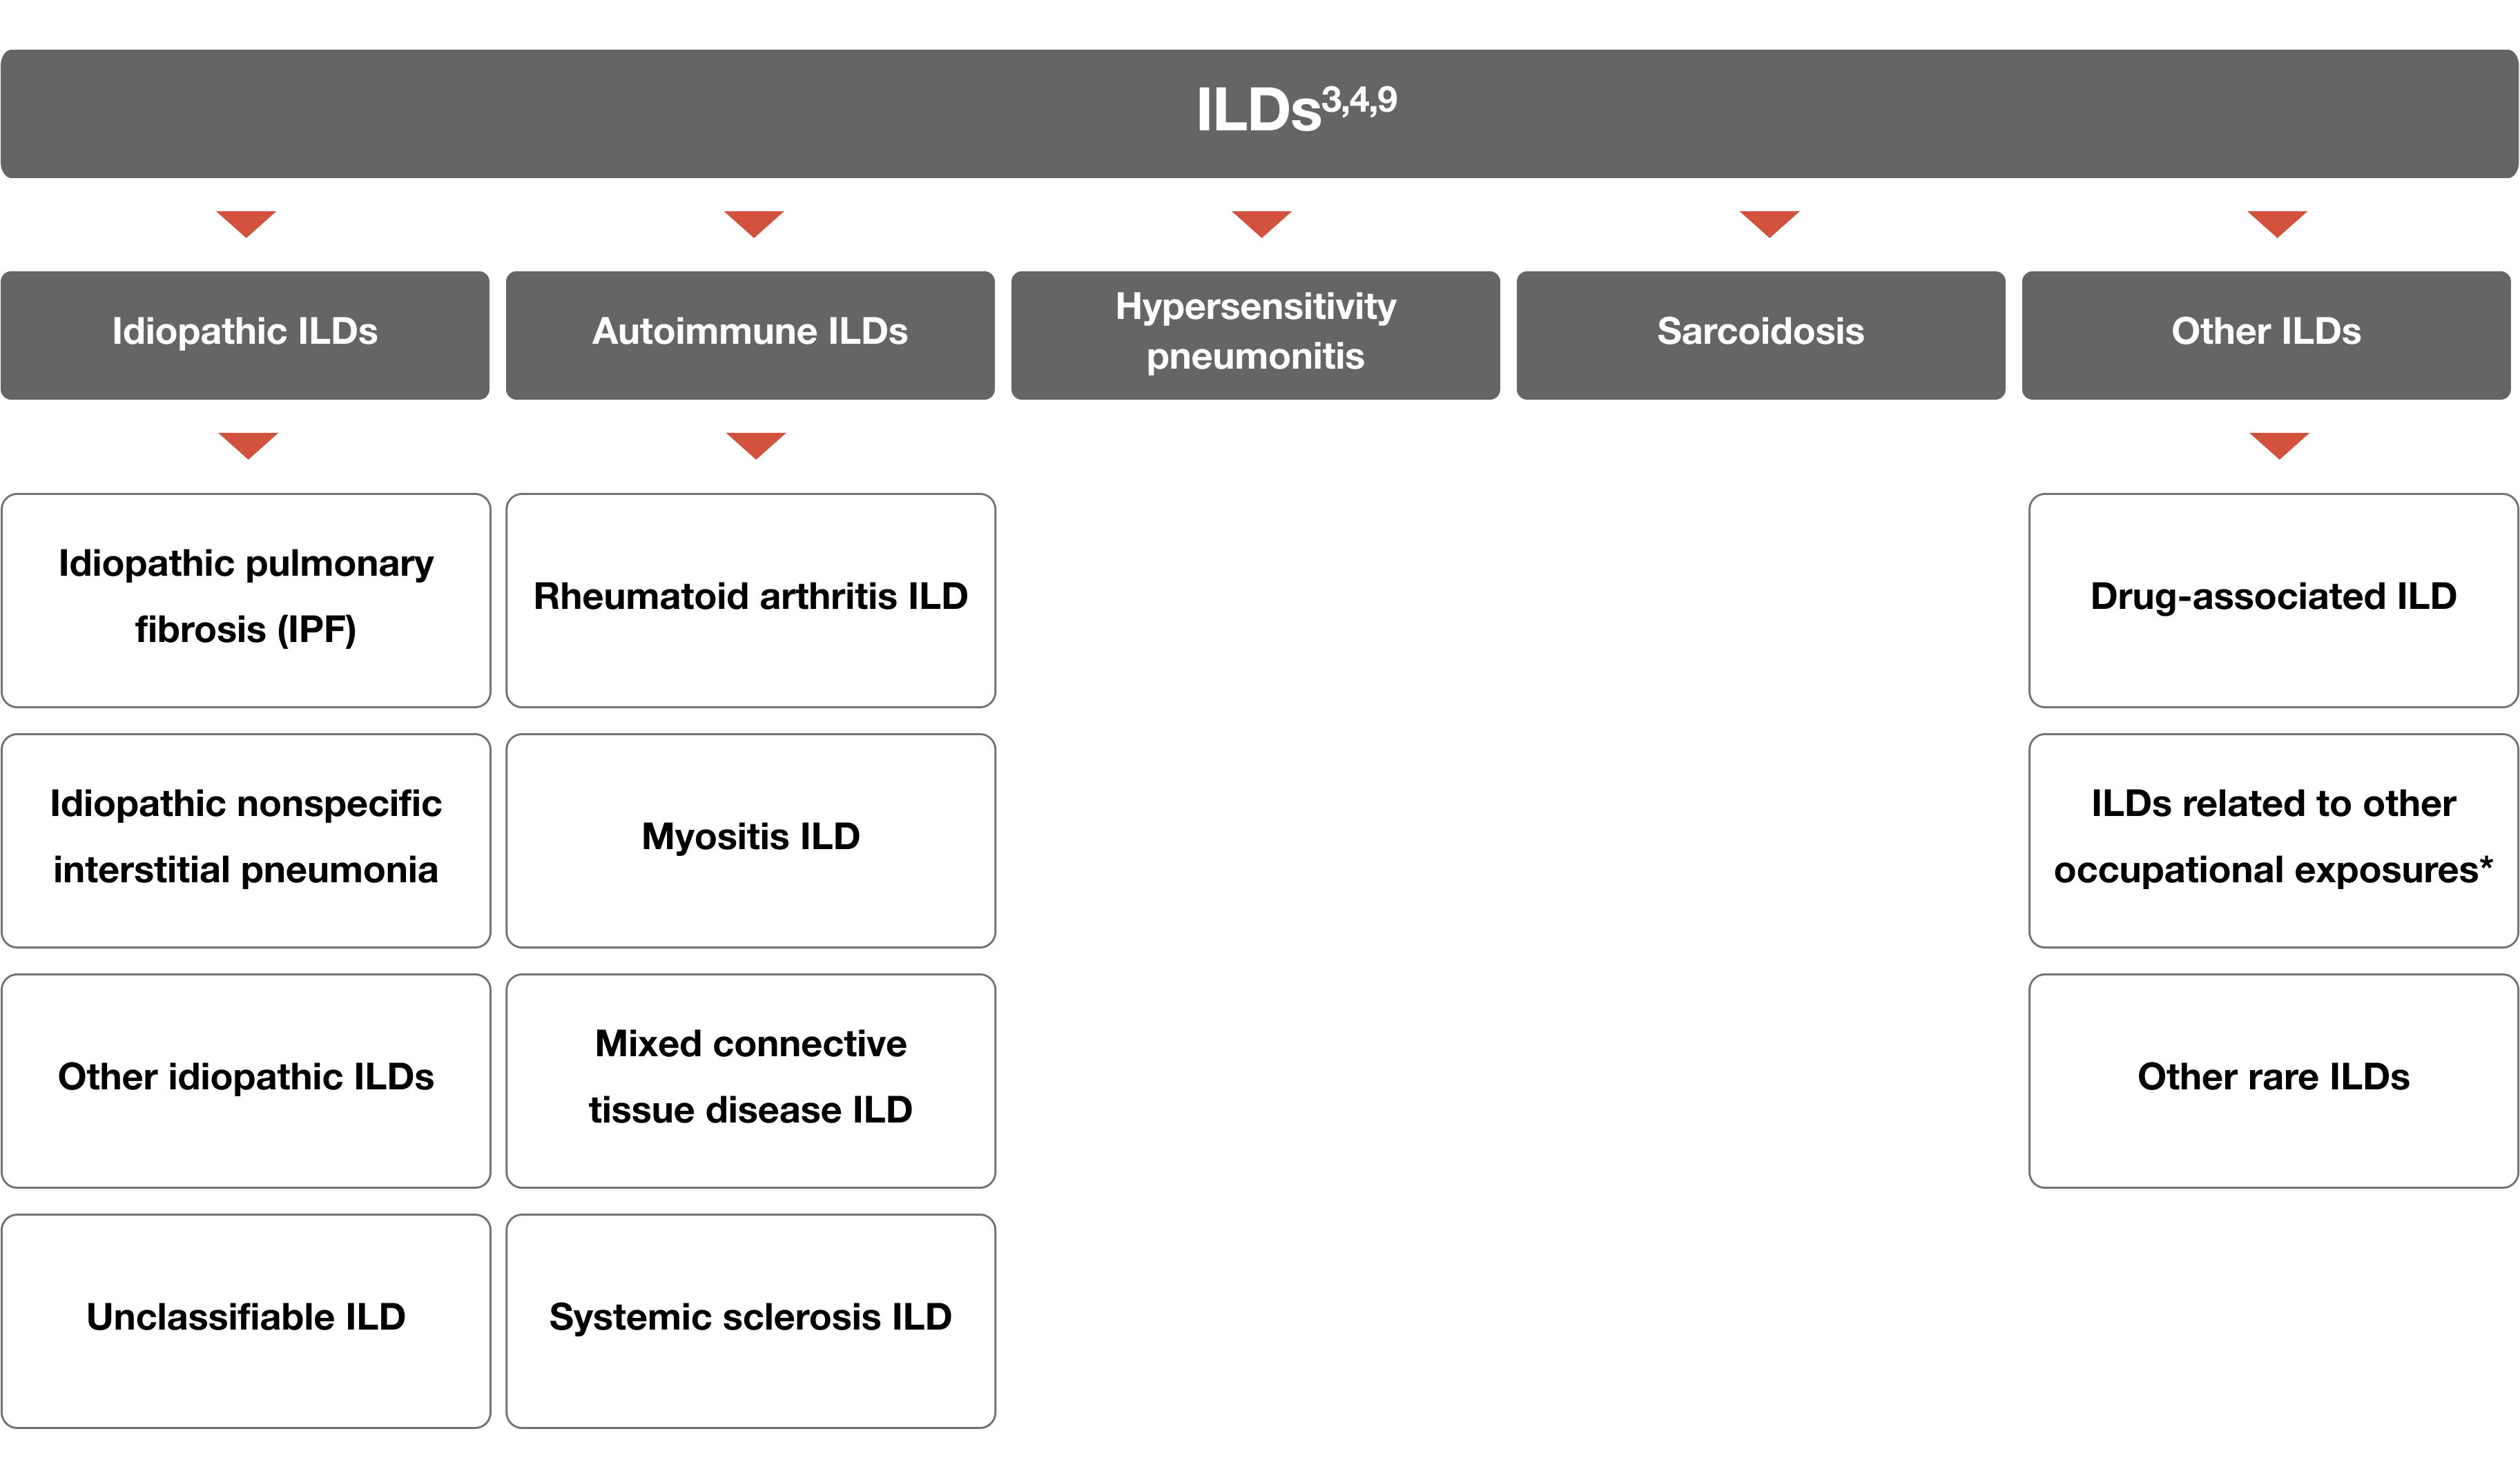 ILD lung disorders chart showing types of ILDs